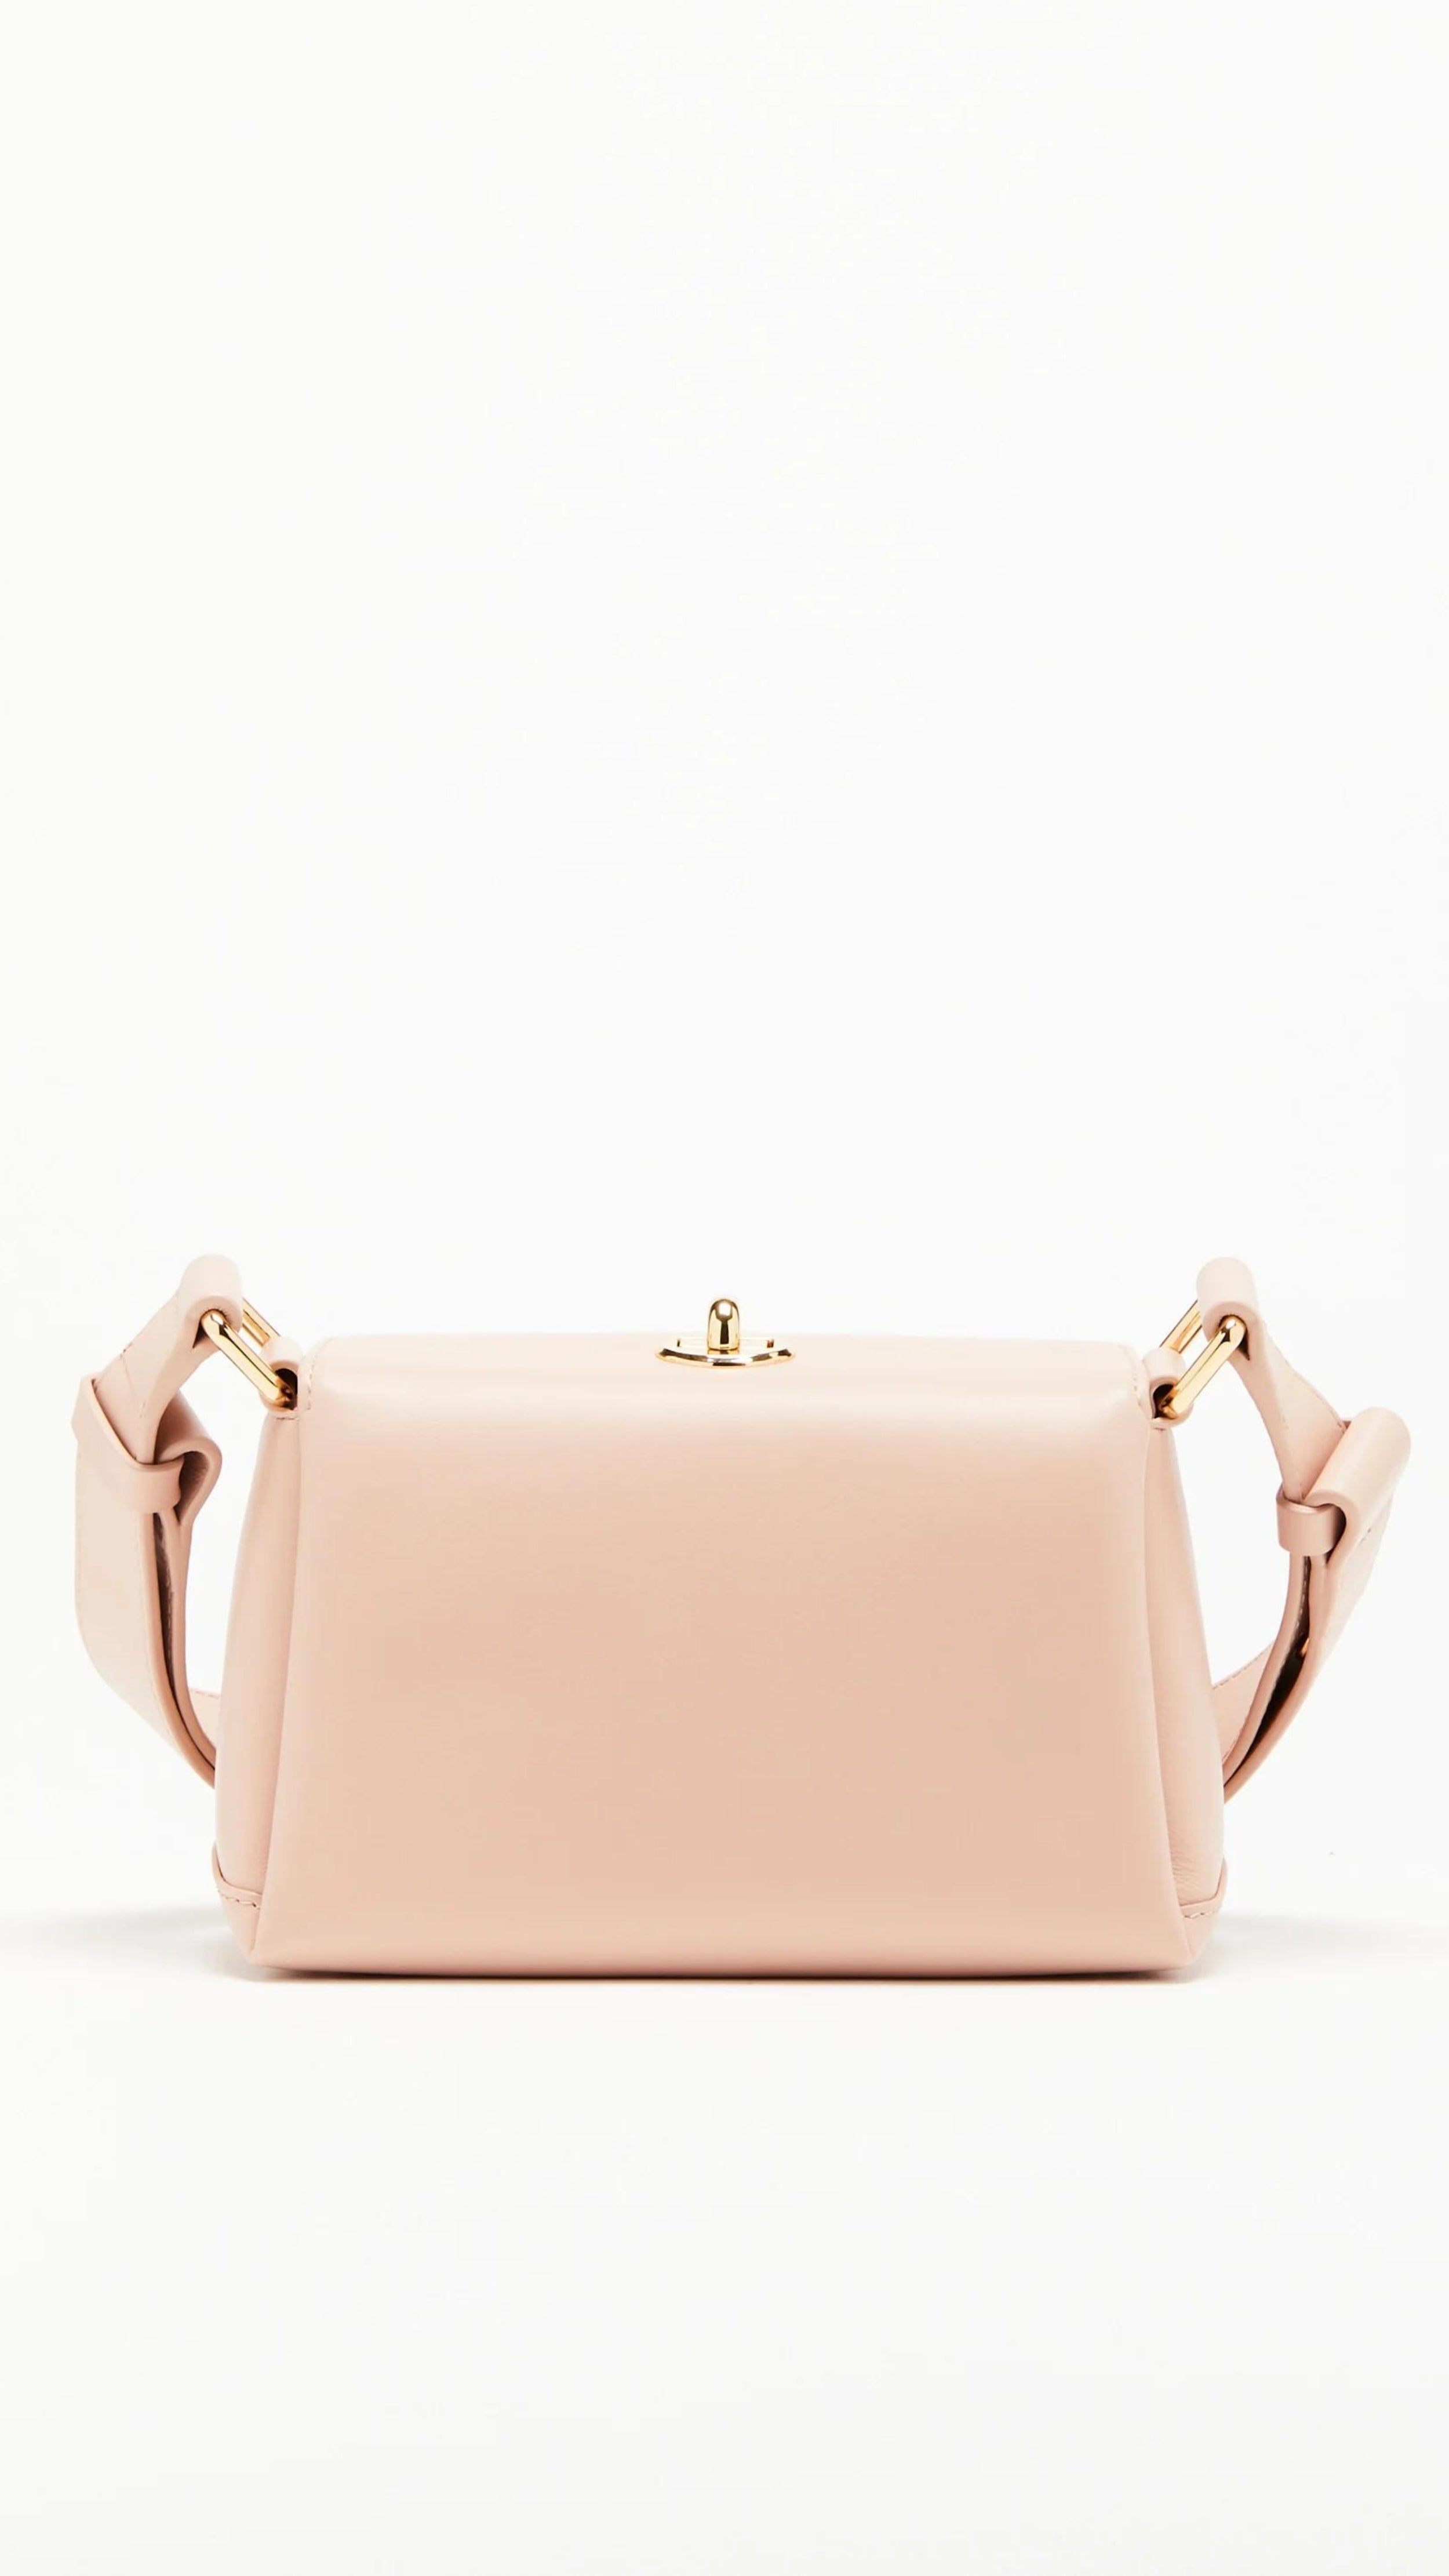 The Mini Folded Bag in Sand Pink